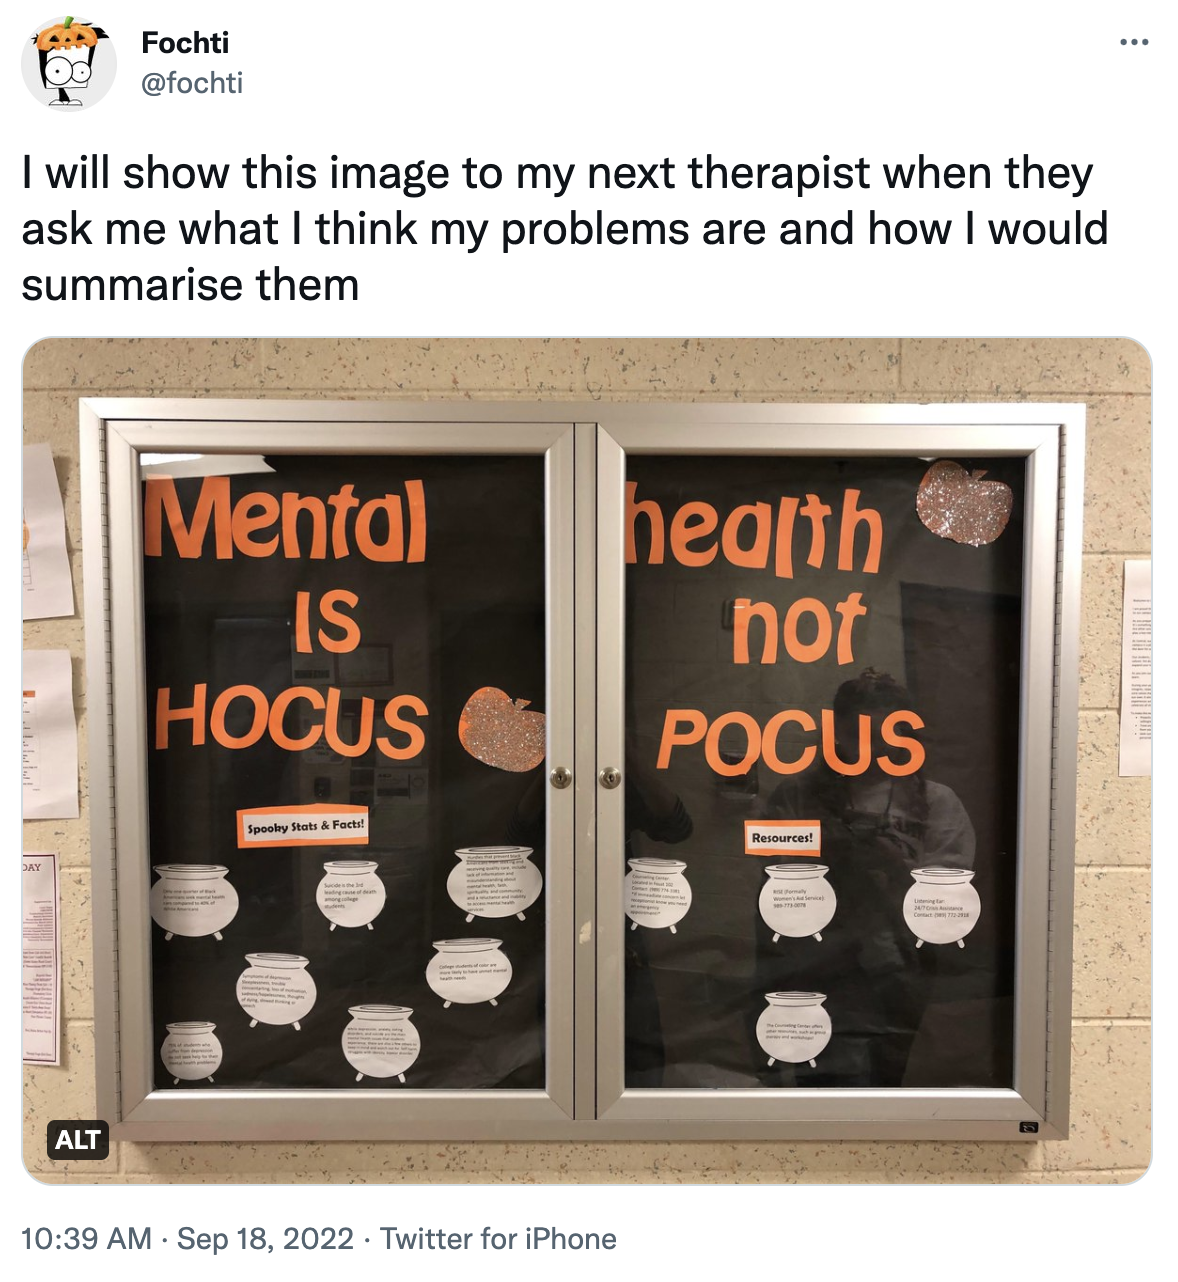 A tweet with an image showing a Halloween-themed school bulletin board that says "Mental health is not hocus pocus." The tweet captions it: "I will show this image to my next therapist when they ask me what I think my problems are and how I would summarize them."